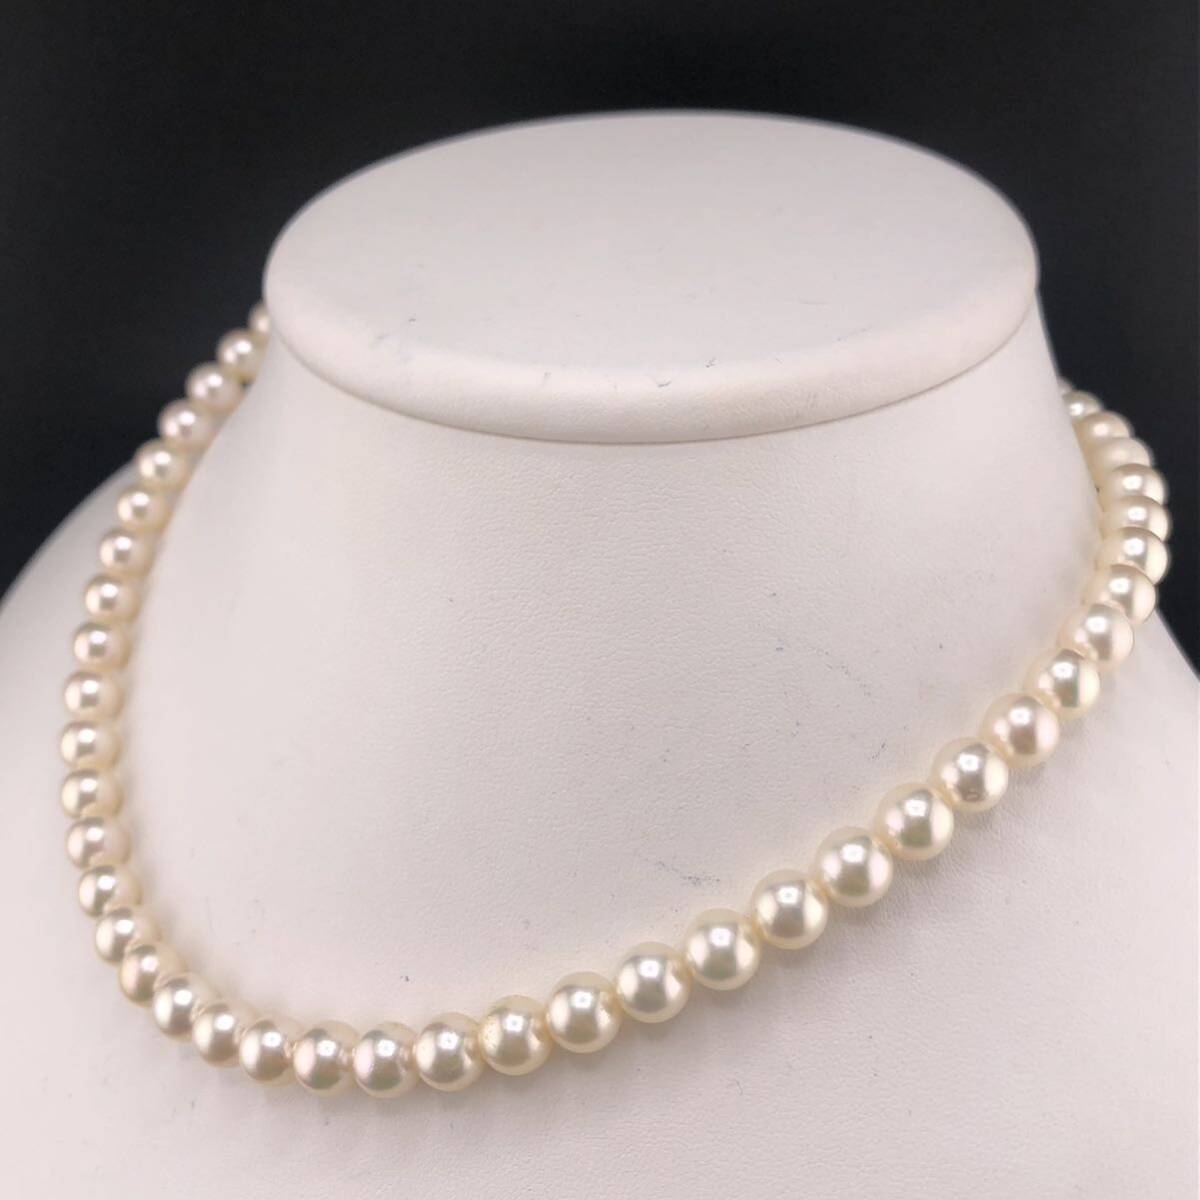 E04-7130 アコヤパールネックレス 7.0mm~7.5mm 40cm 33.3g ( アコヤ真珠 Pearl necklace SILVER )の画像2